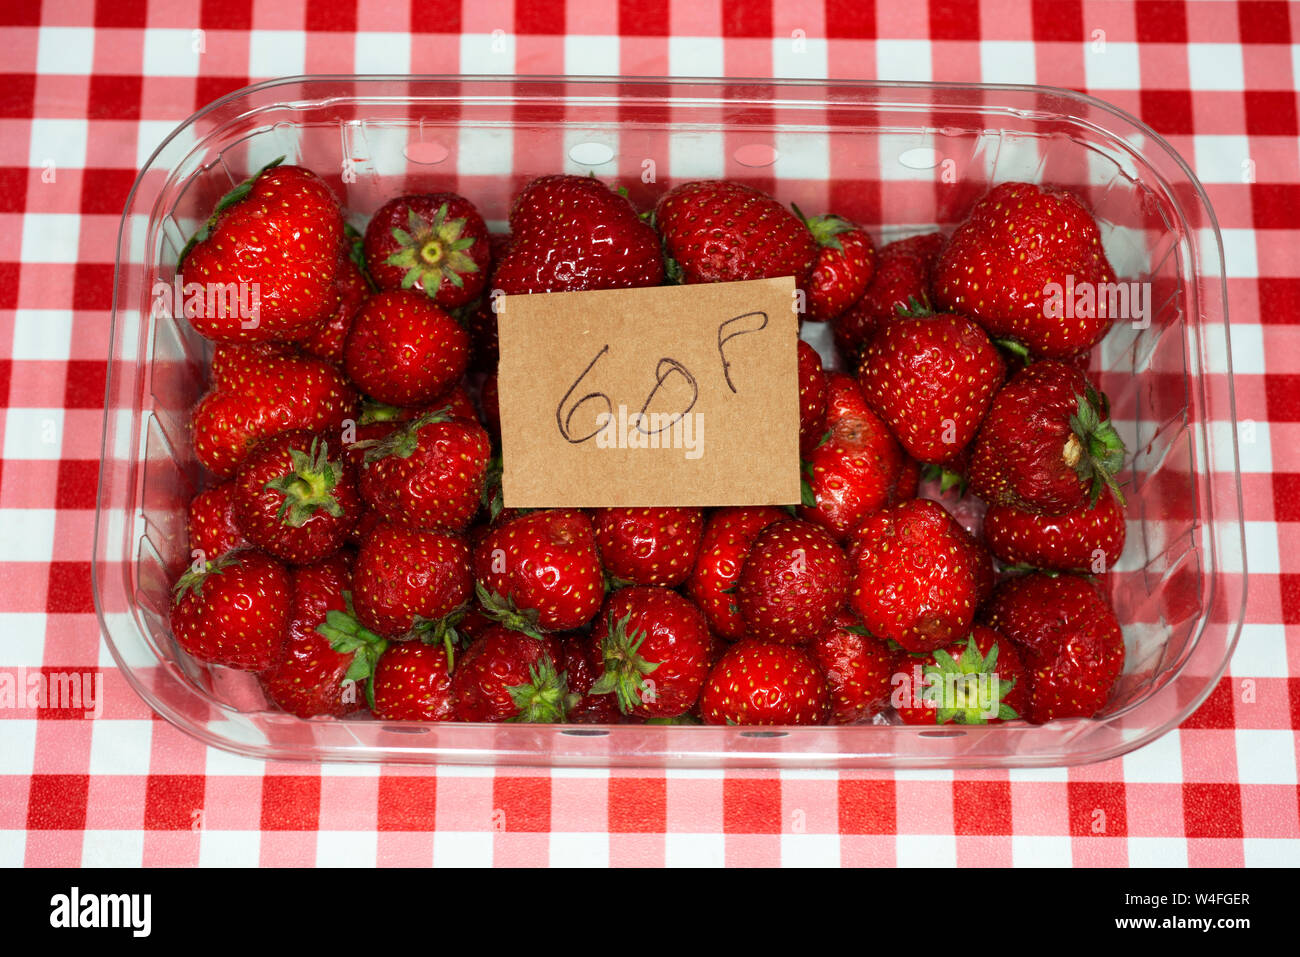 Garden grown strawberries sold at a village fate Stock Photo